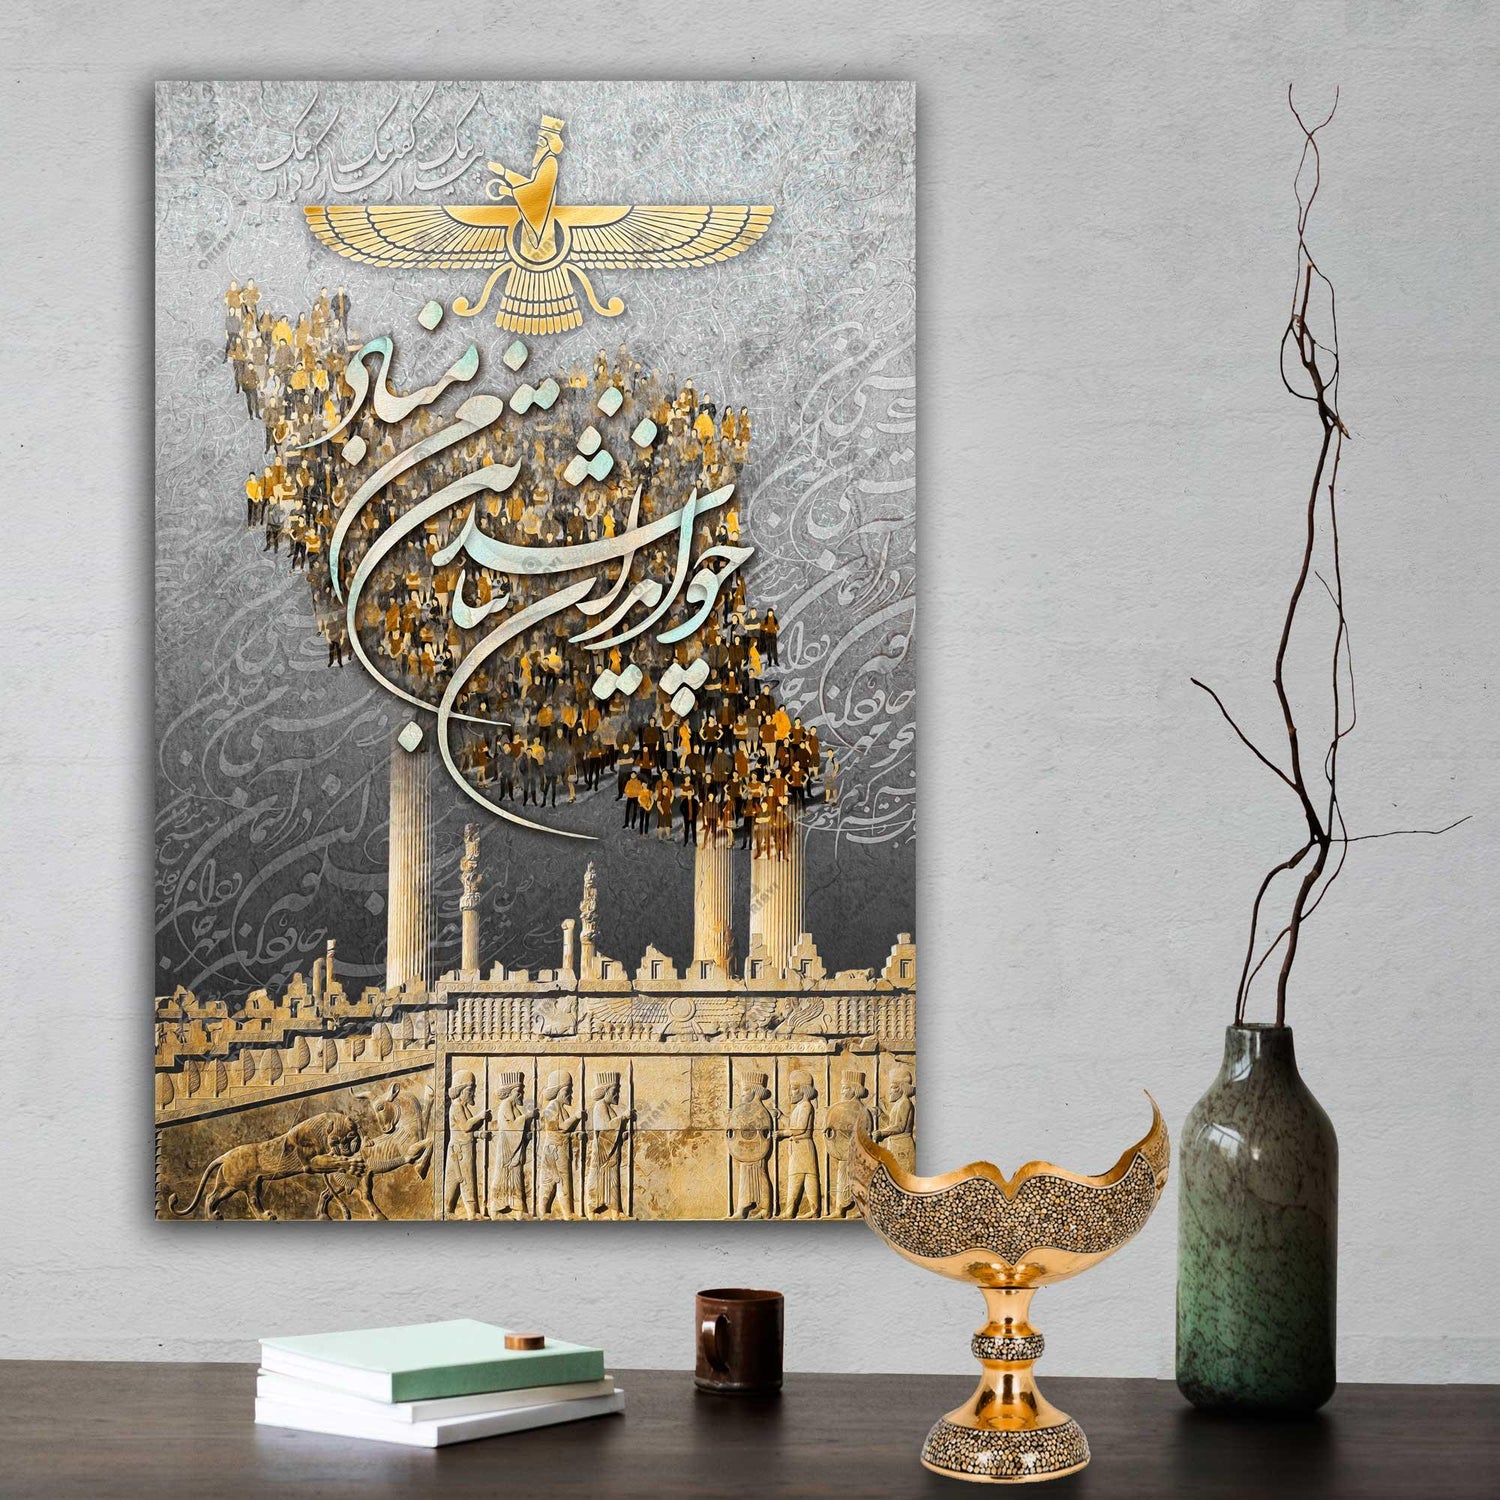 This artistic Persian wall art features a colorful motif of Iranain calligraphy. You can hang it on your wall to add sophisticated style that is sure to impress everyone.  چـو ایـران نباشد تن من مـبـاد